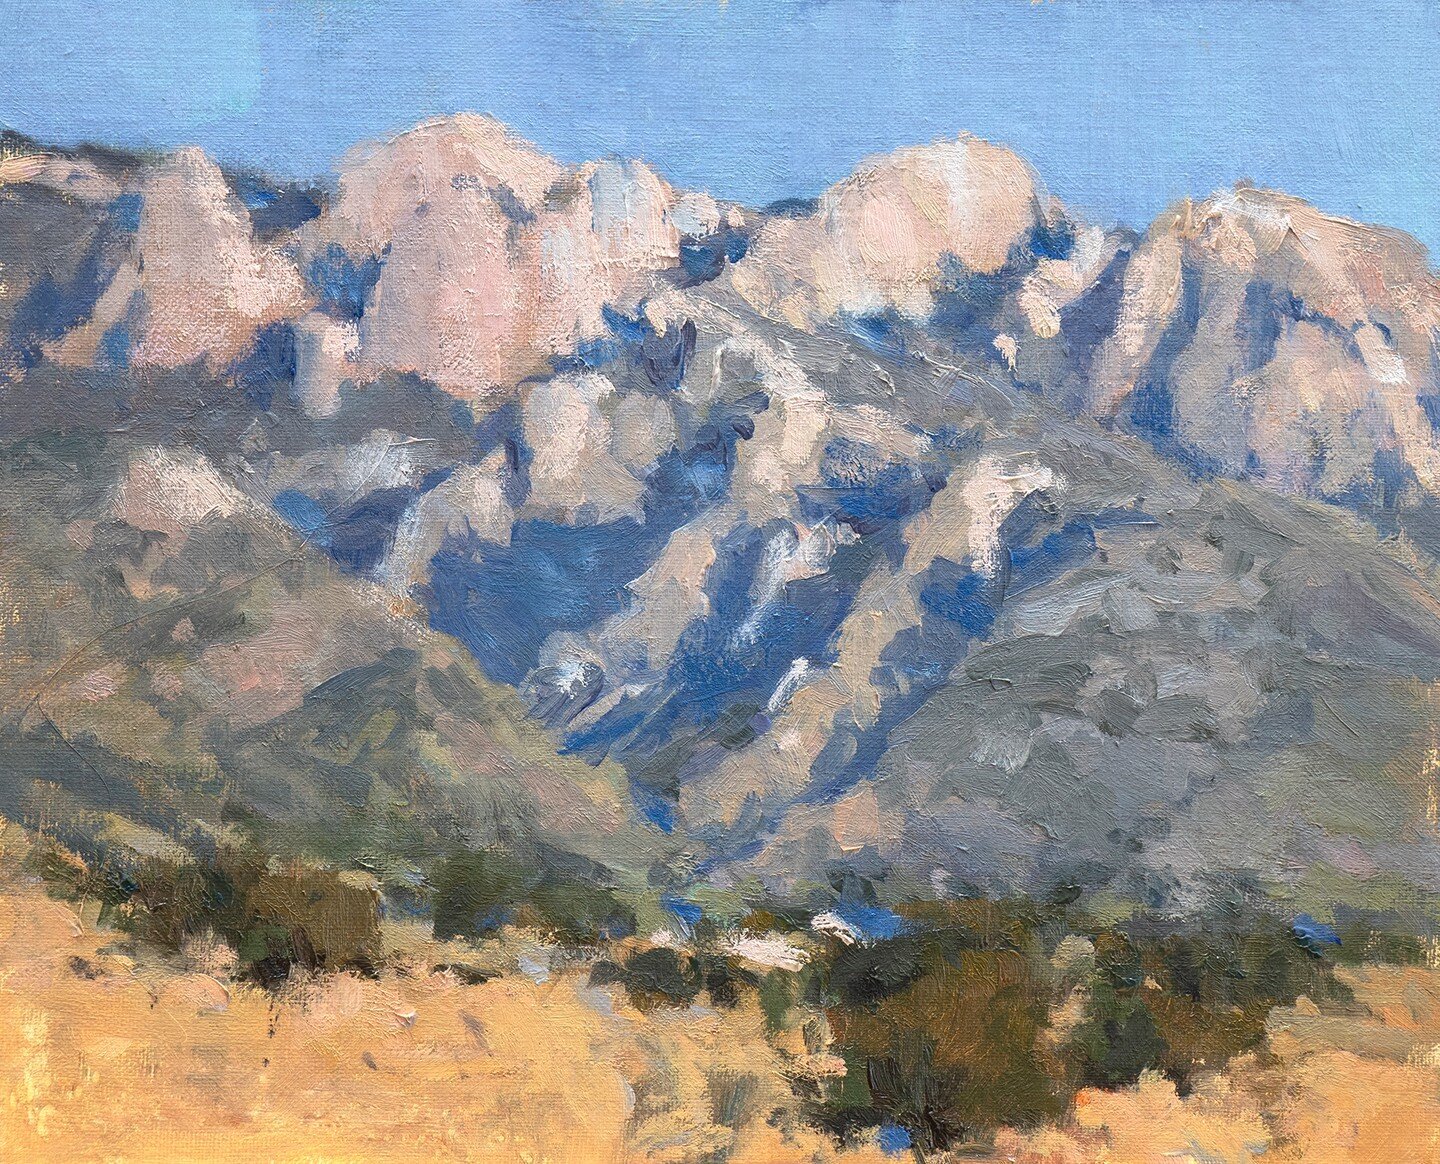 &quot;Edging Toward Twilight&quot;, 8x10, oil. This is a plein air of the Sandia Mountains on a very cold day this winter. My hands and feet froze, even with layers of warm clothing. Great fun though, hiking up an arroyo to set up and be inspired by 